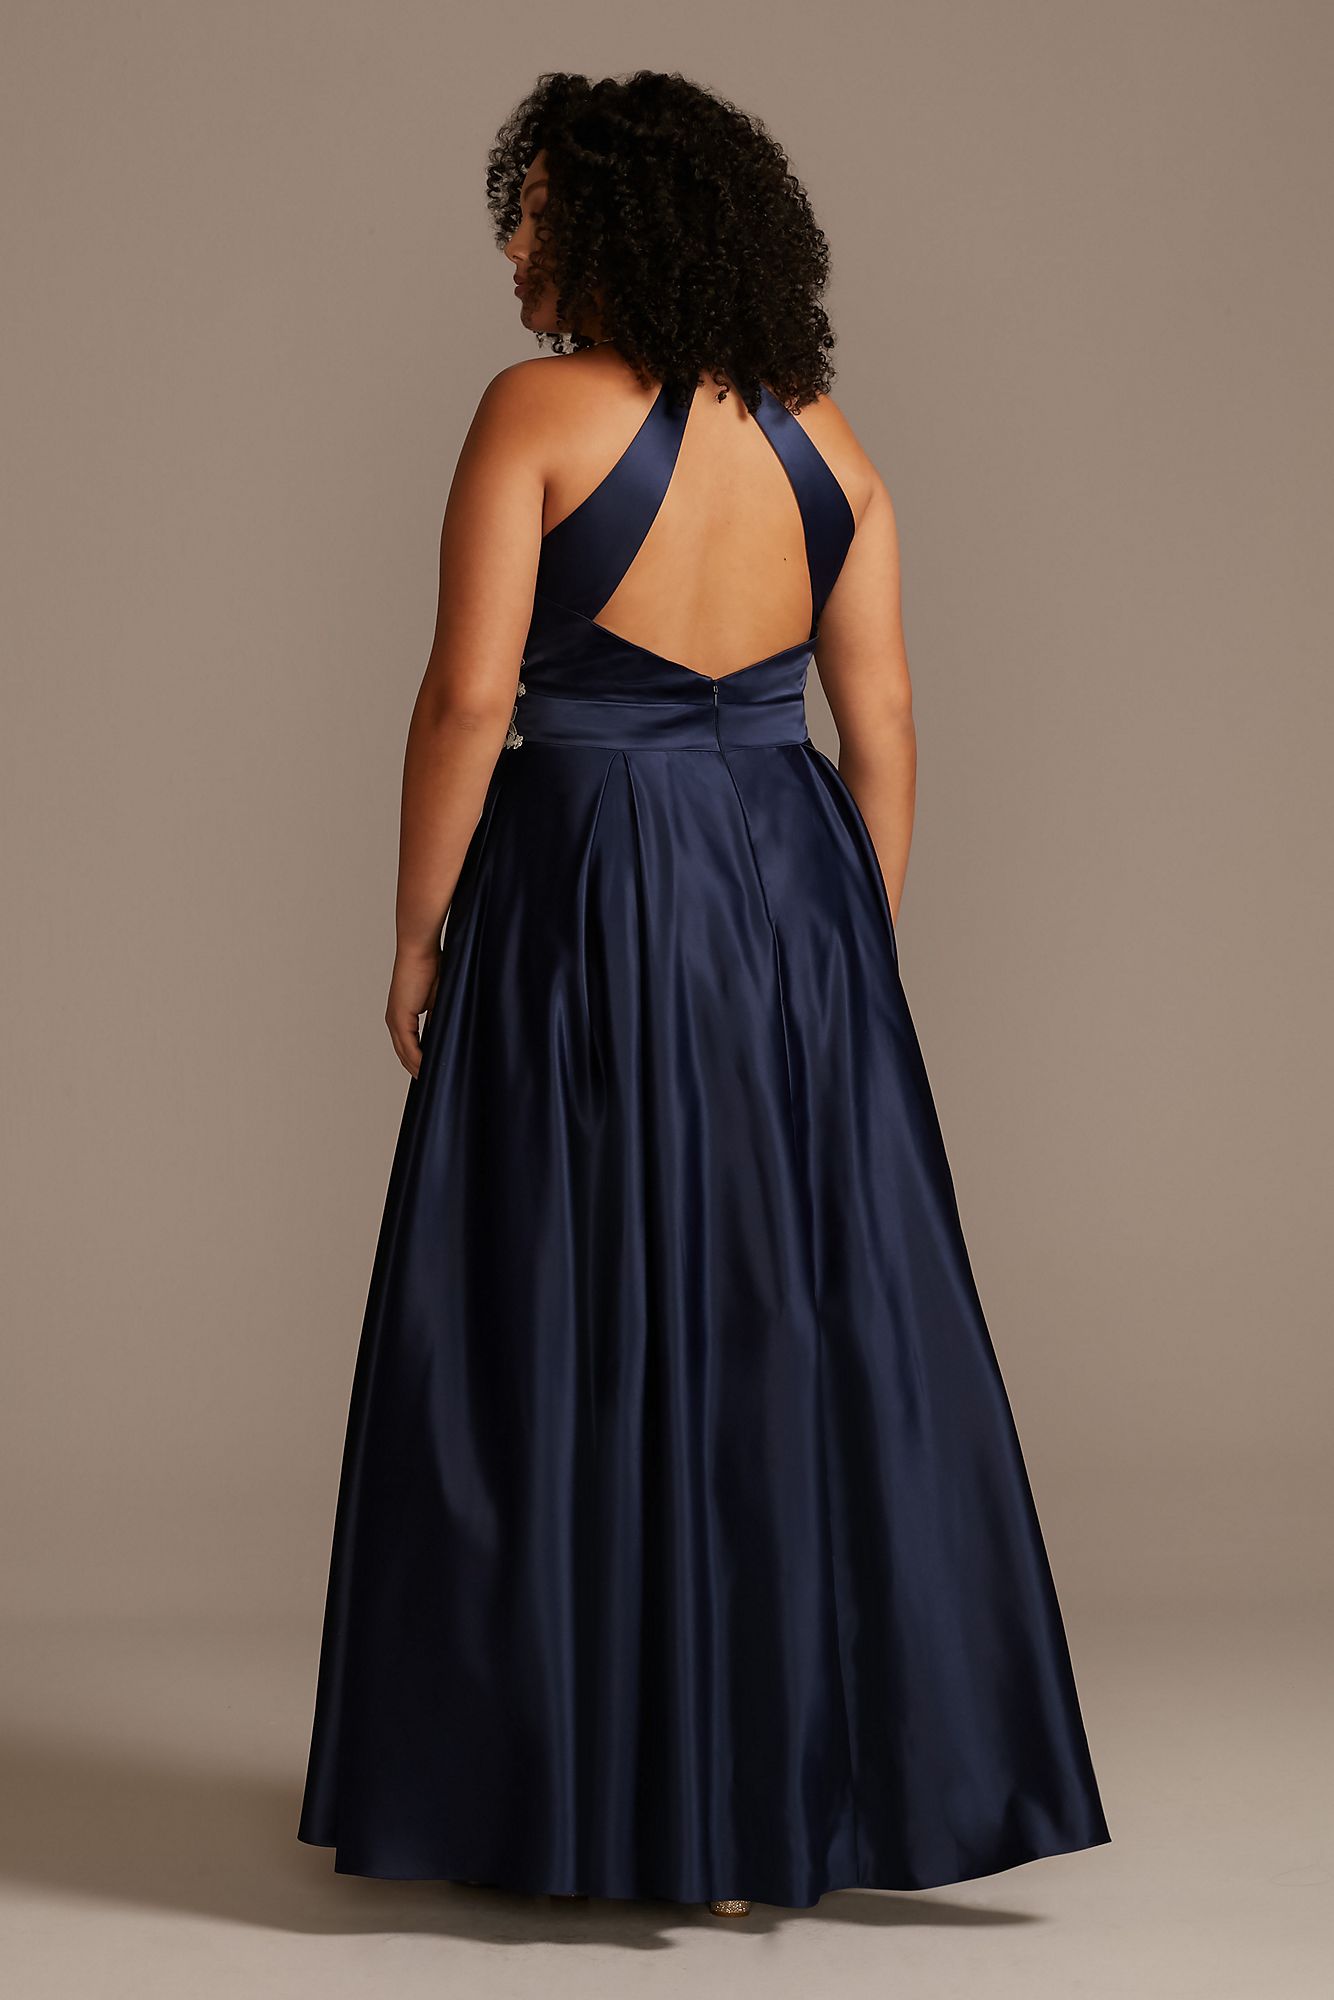 Embellished Satin Plus Size Gown with Open Back 1168BNW